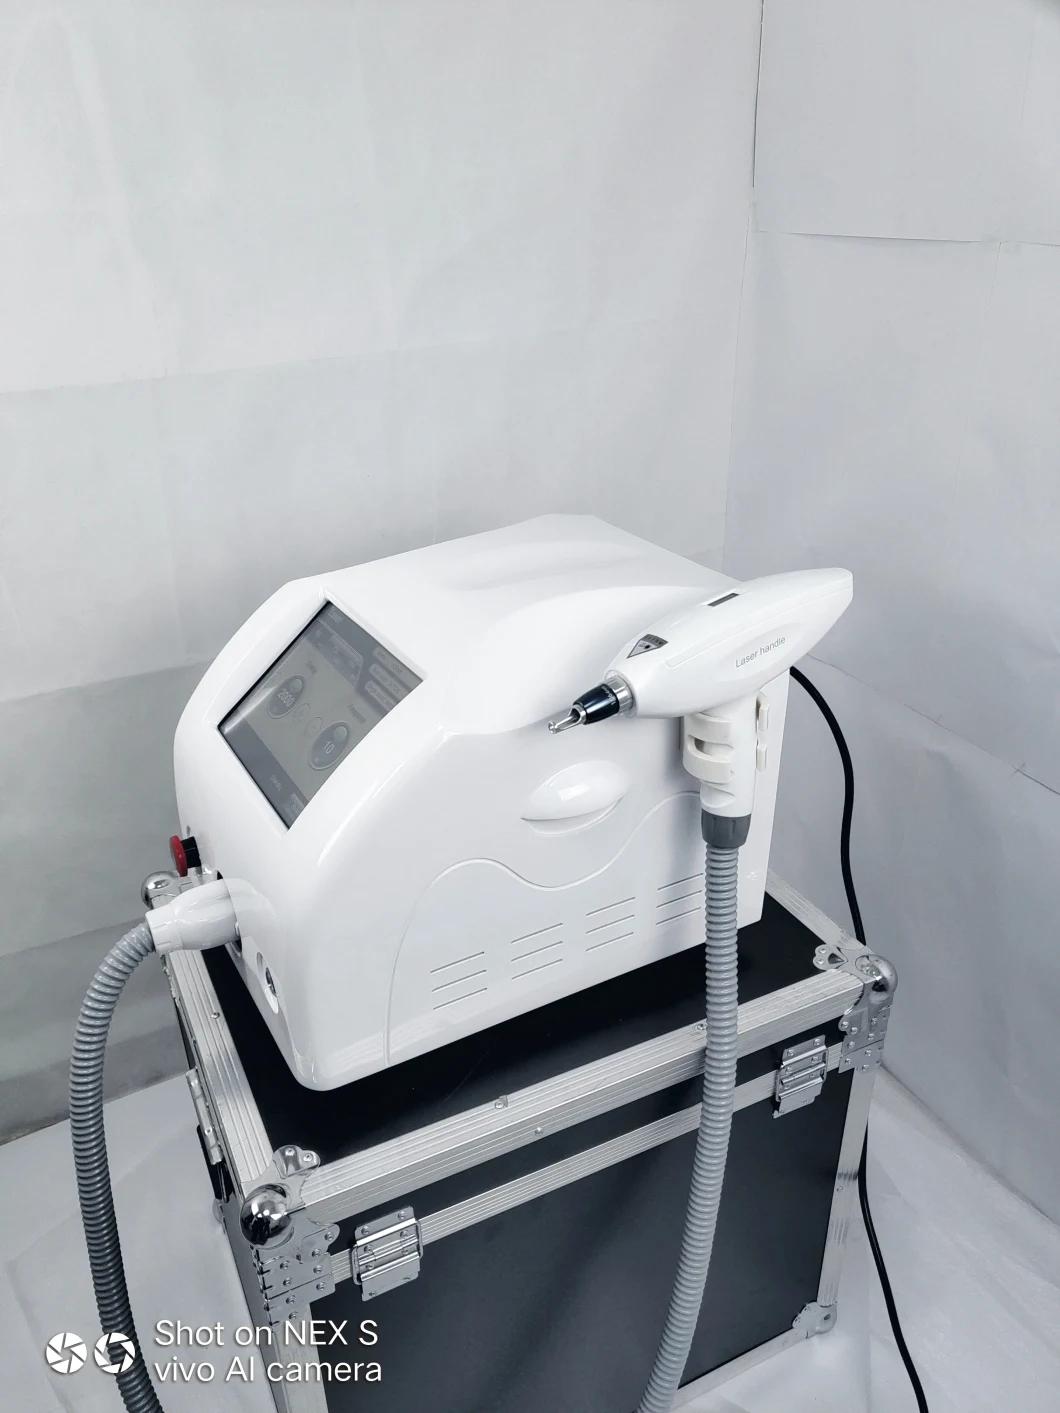 No Surgery 1320nm 1064nm 532nm Ndyag Qswitch Laser Tattoo Removal3 Buyers